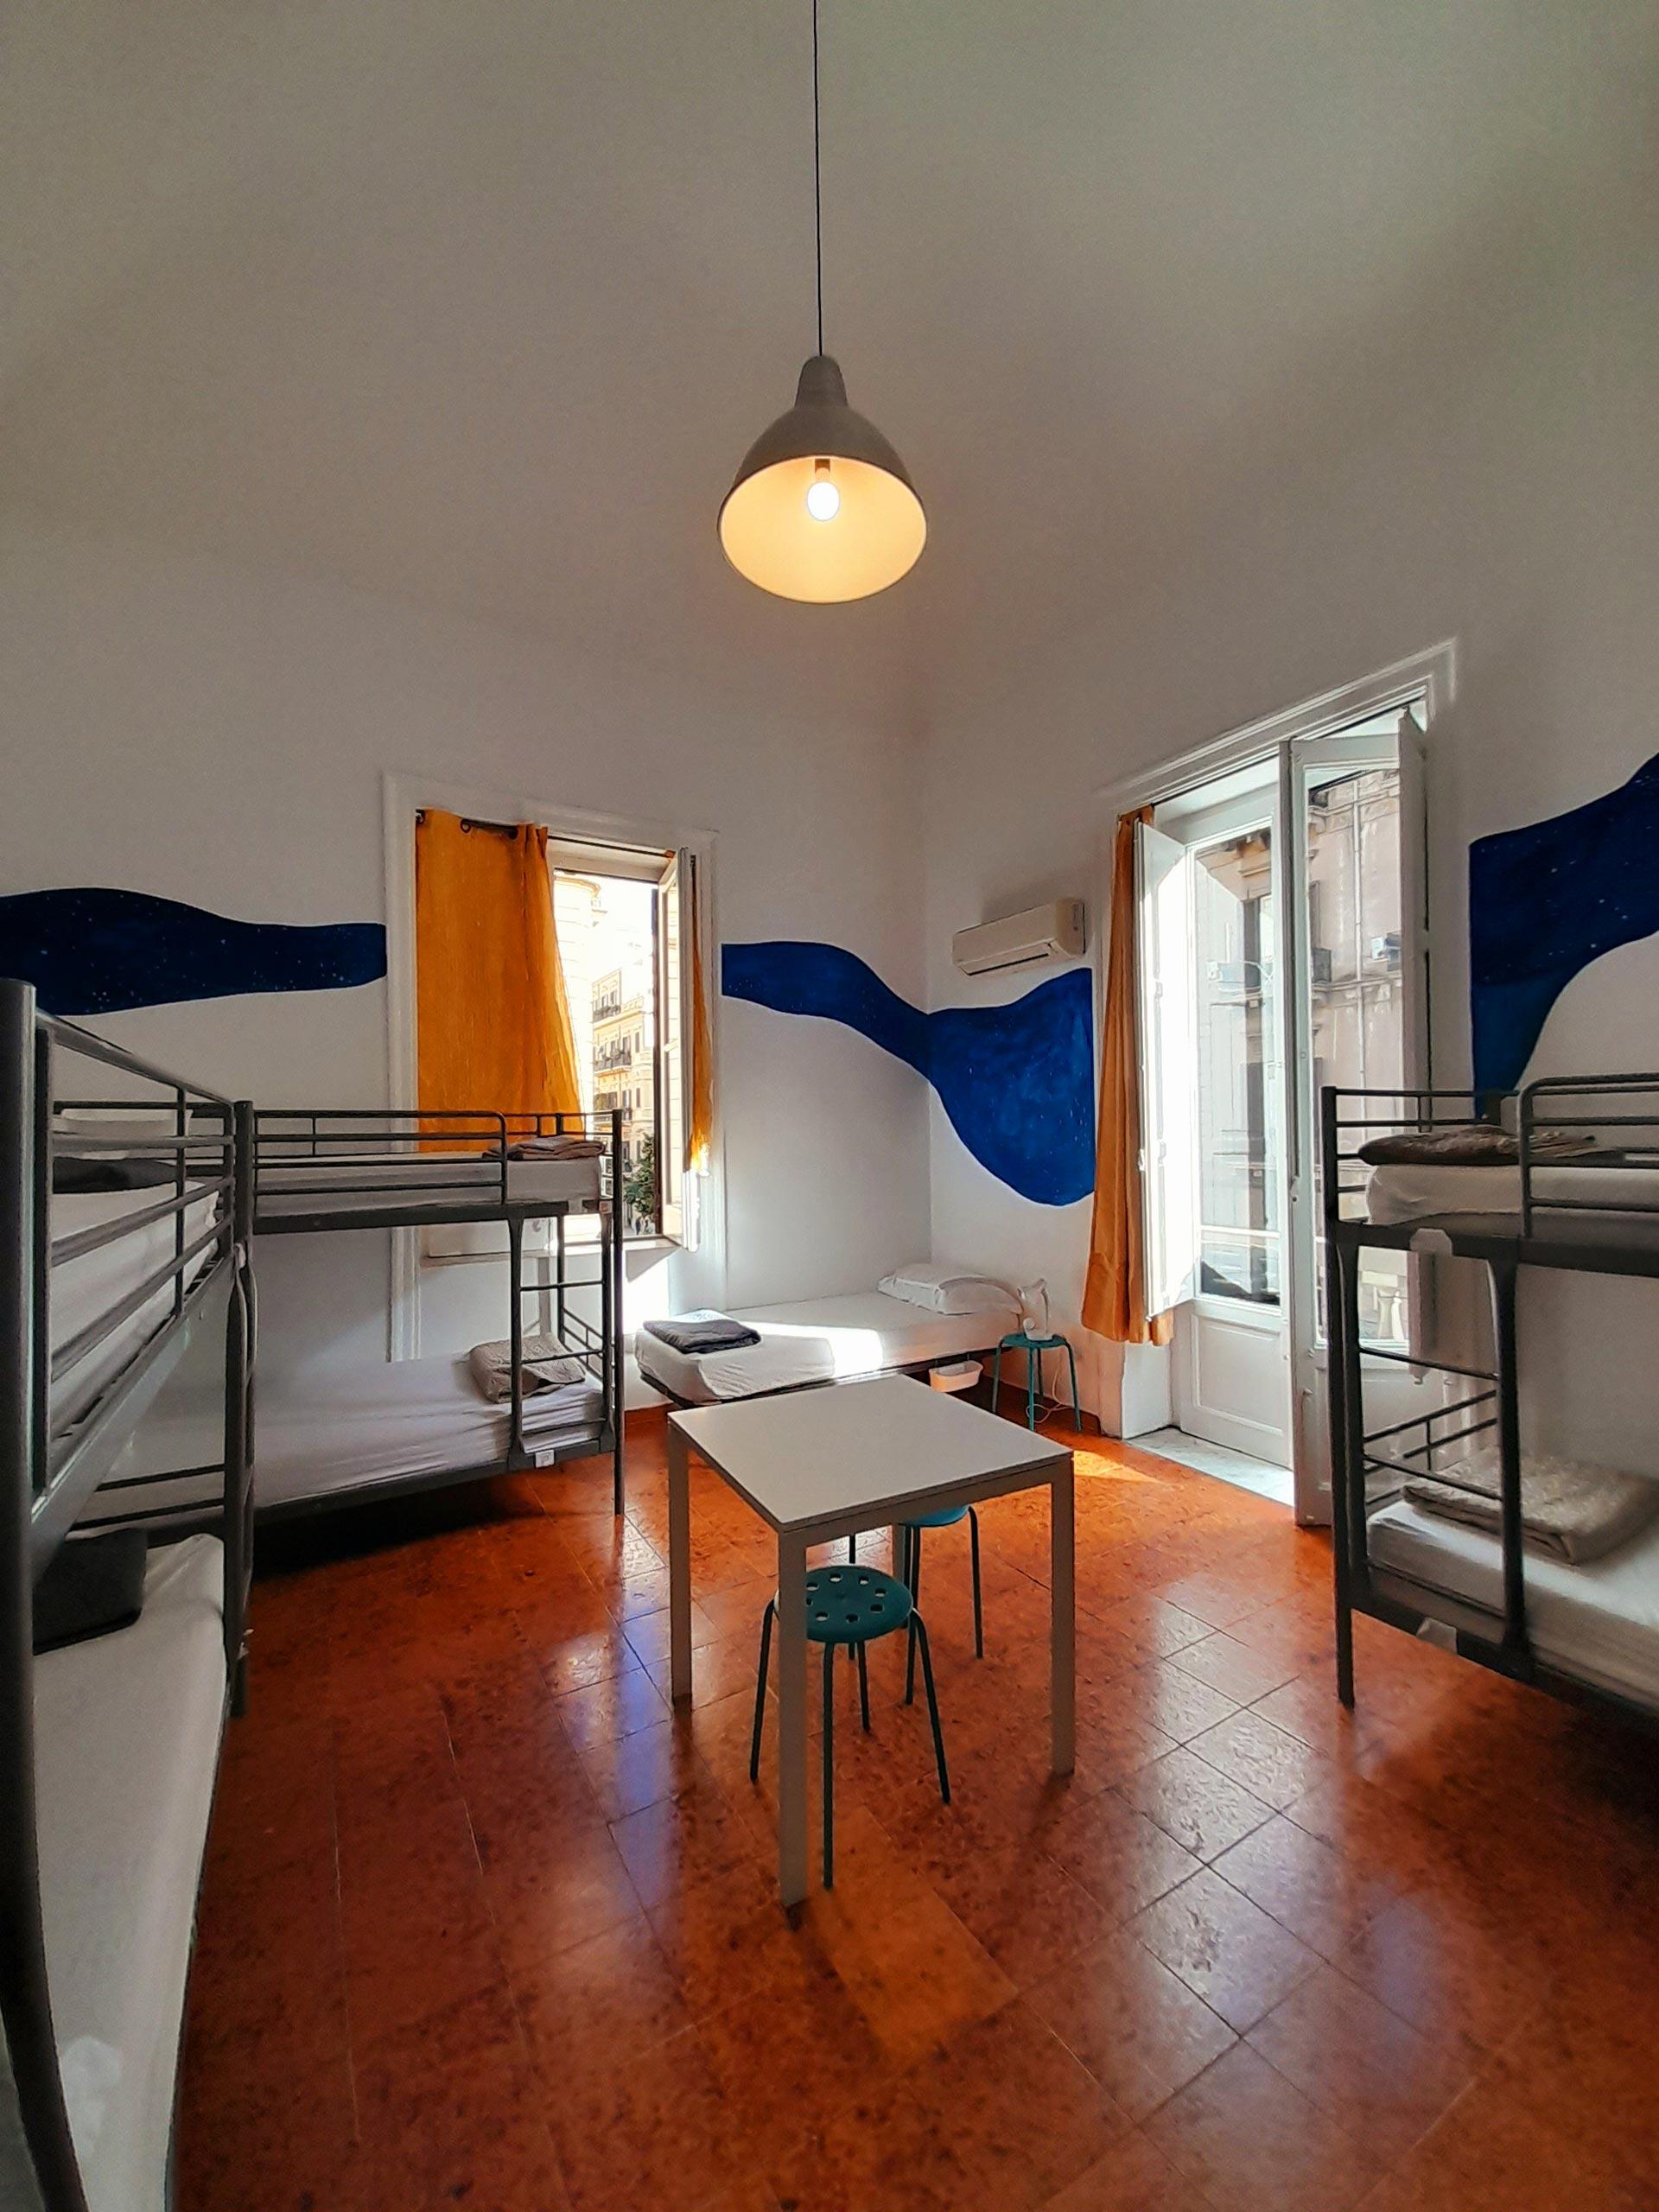 Accommodation in Palermo